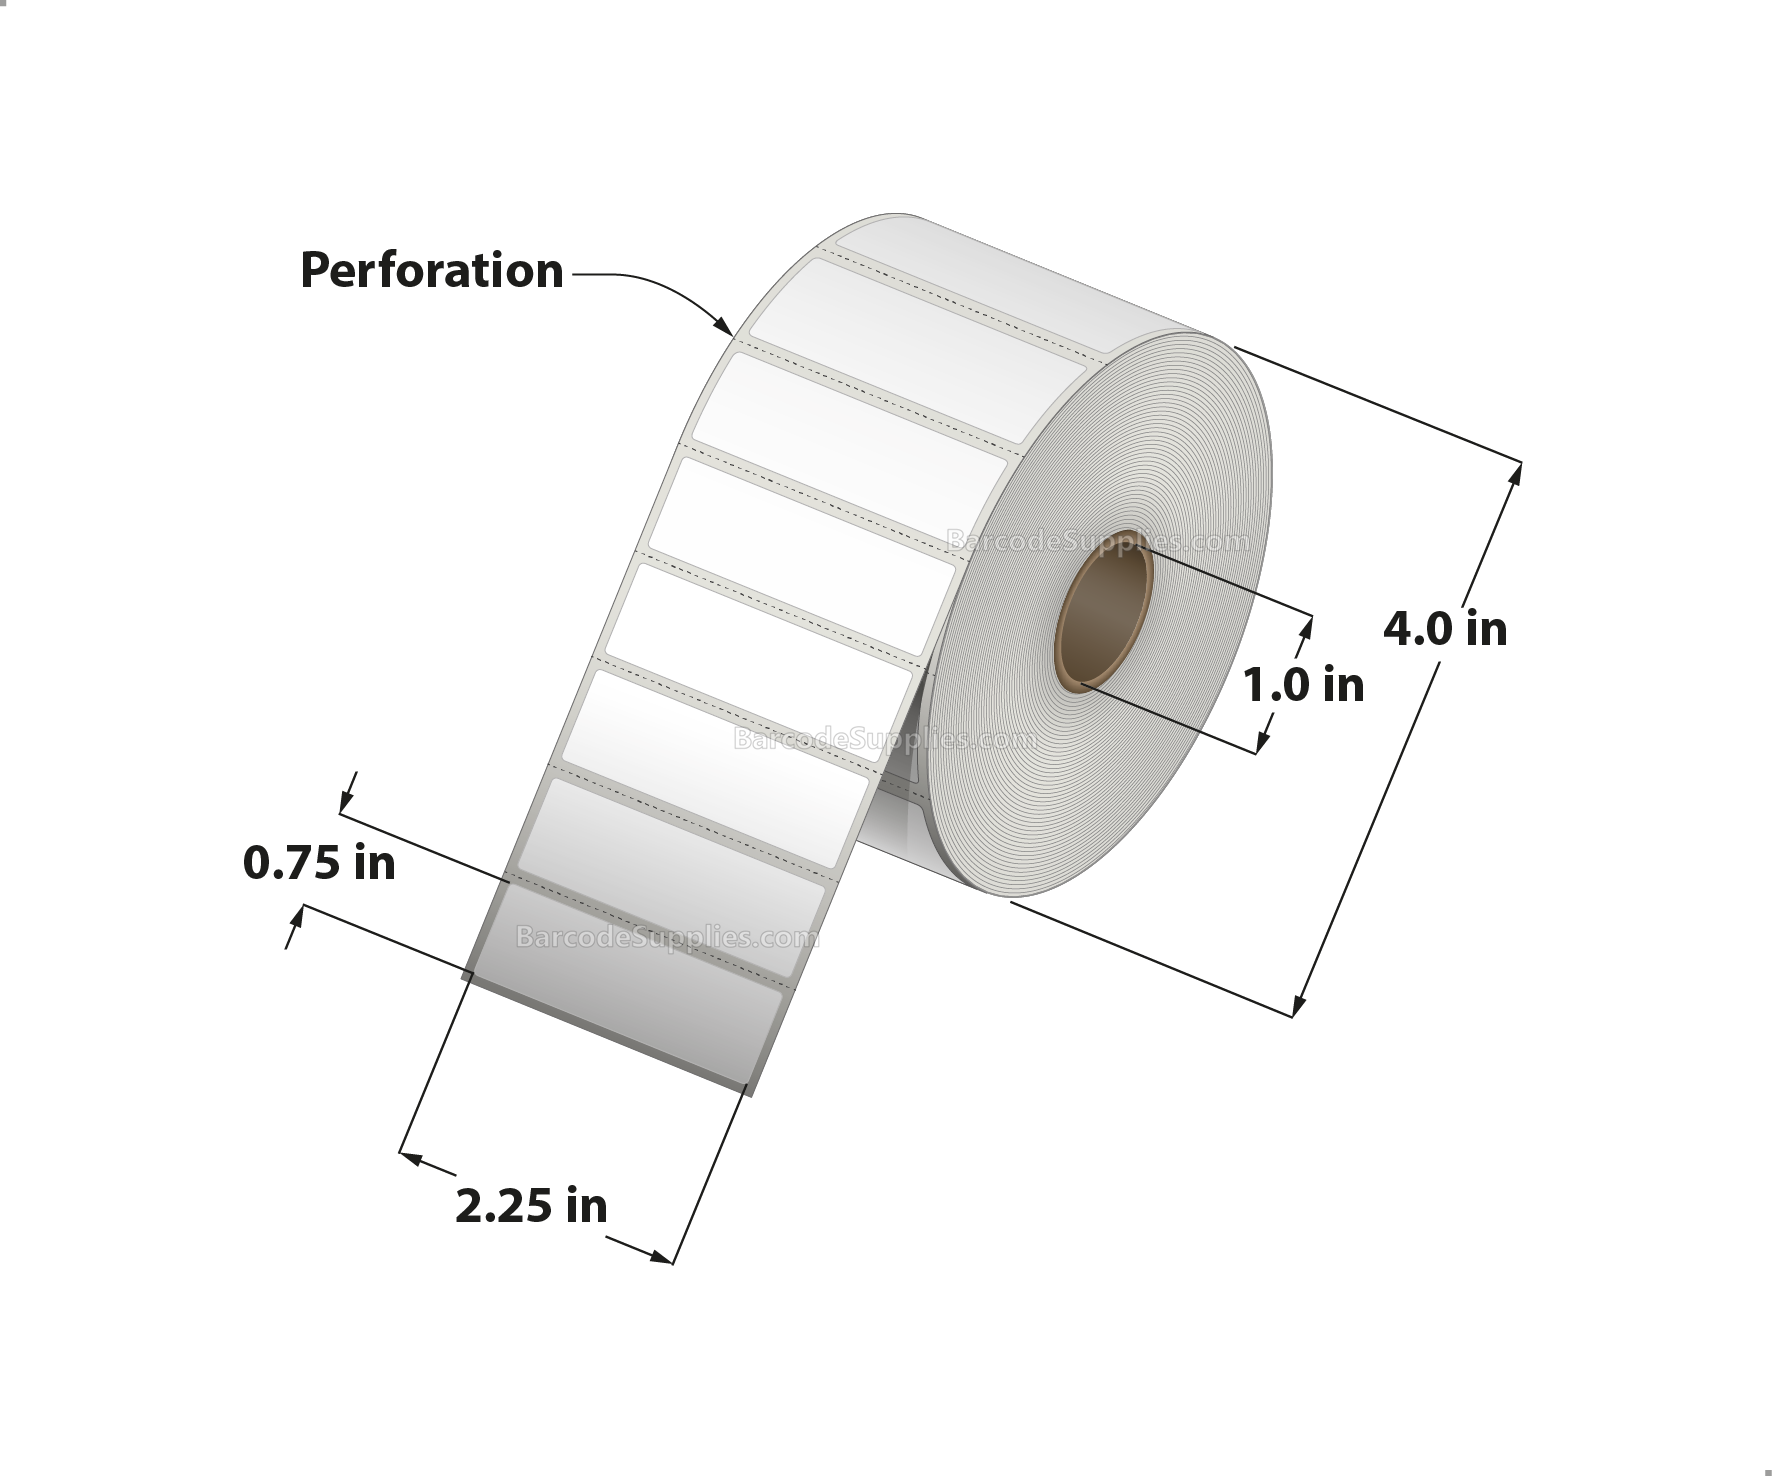 2.25 x 0.75 Thermal Transfer White Labels With Permanent Acrylic Adhesive - Perforated - 1780 Labels Per Roll - Carton Of 4 Rolls - 7120 Labels Total - MPN: TH22575-14PTT